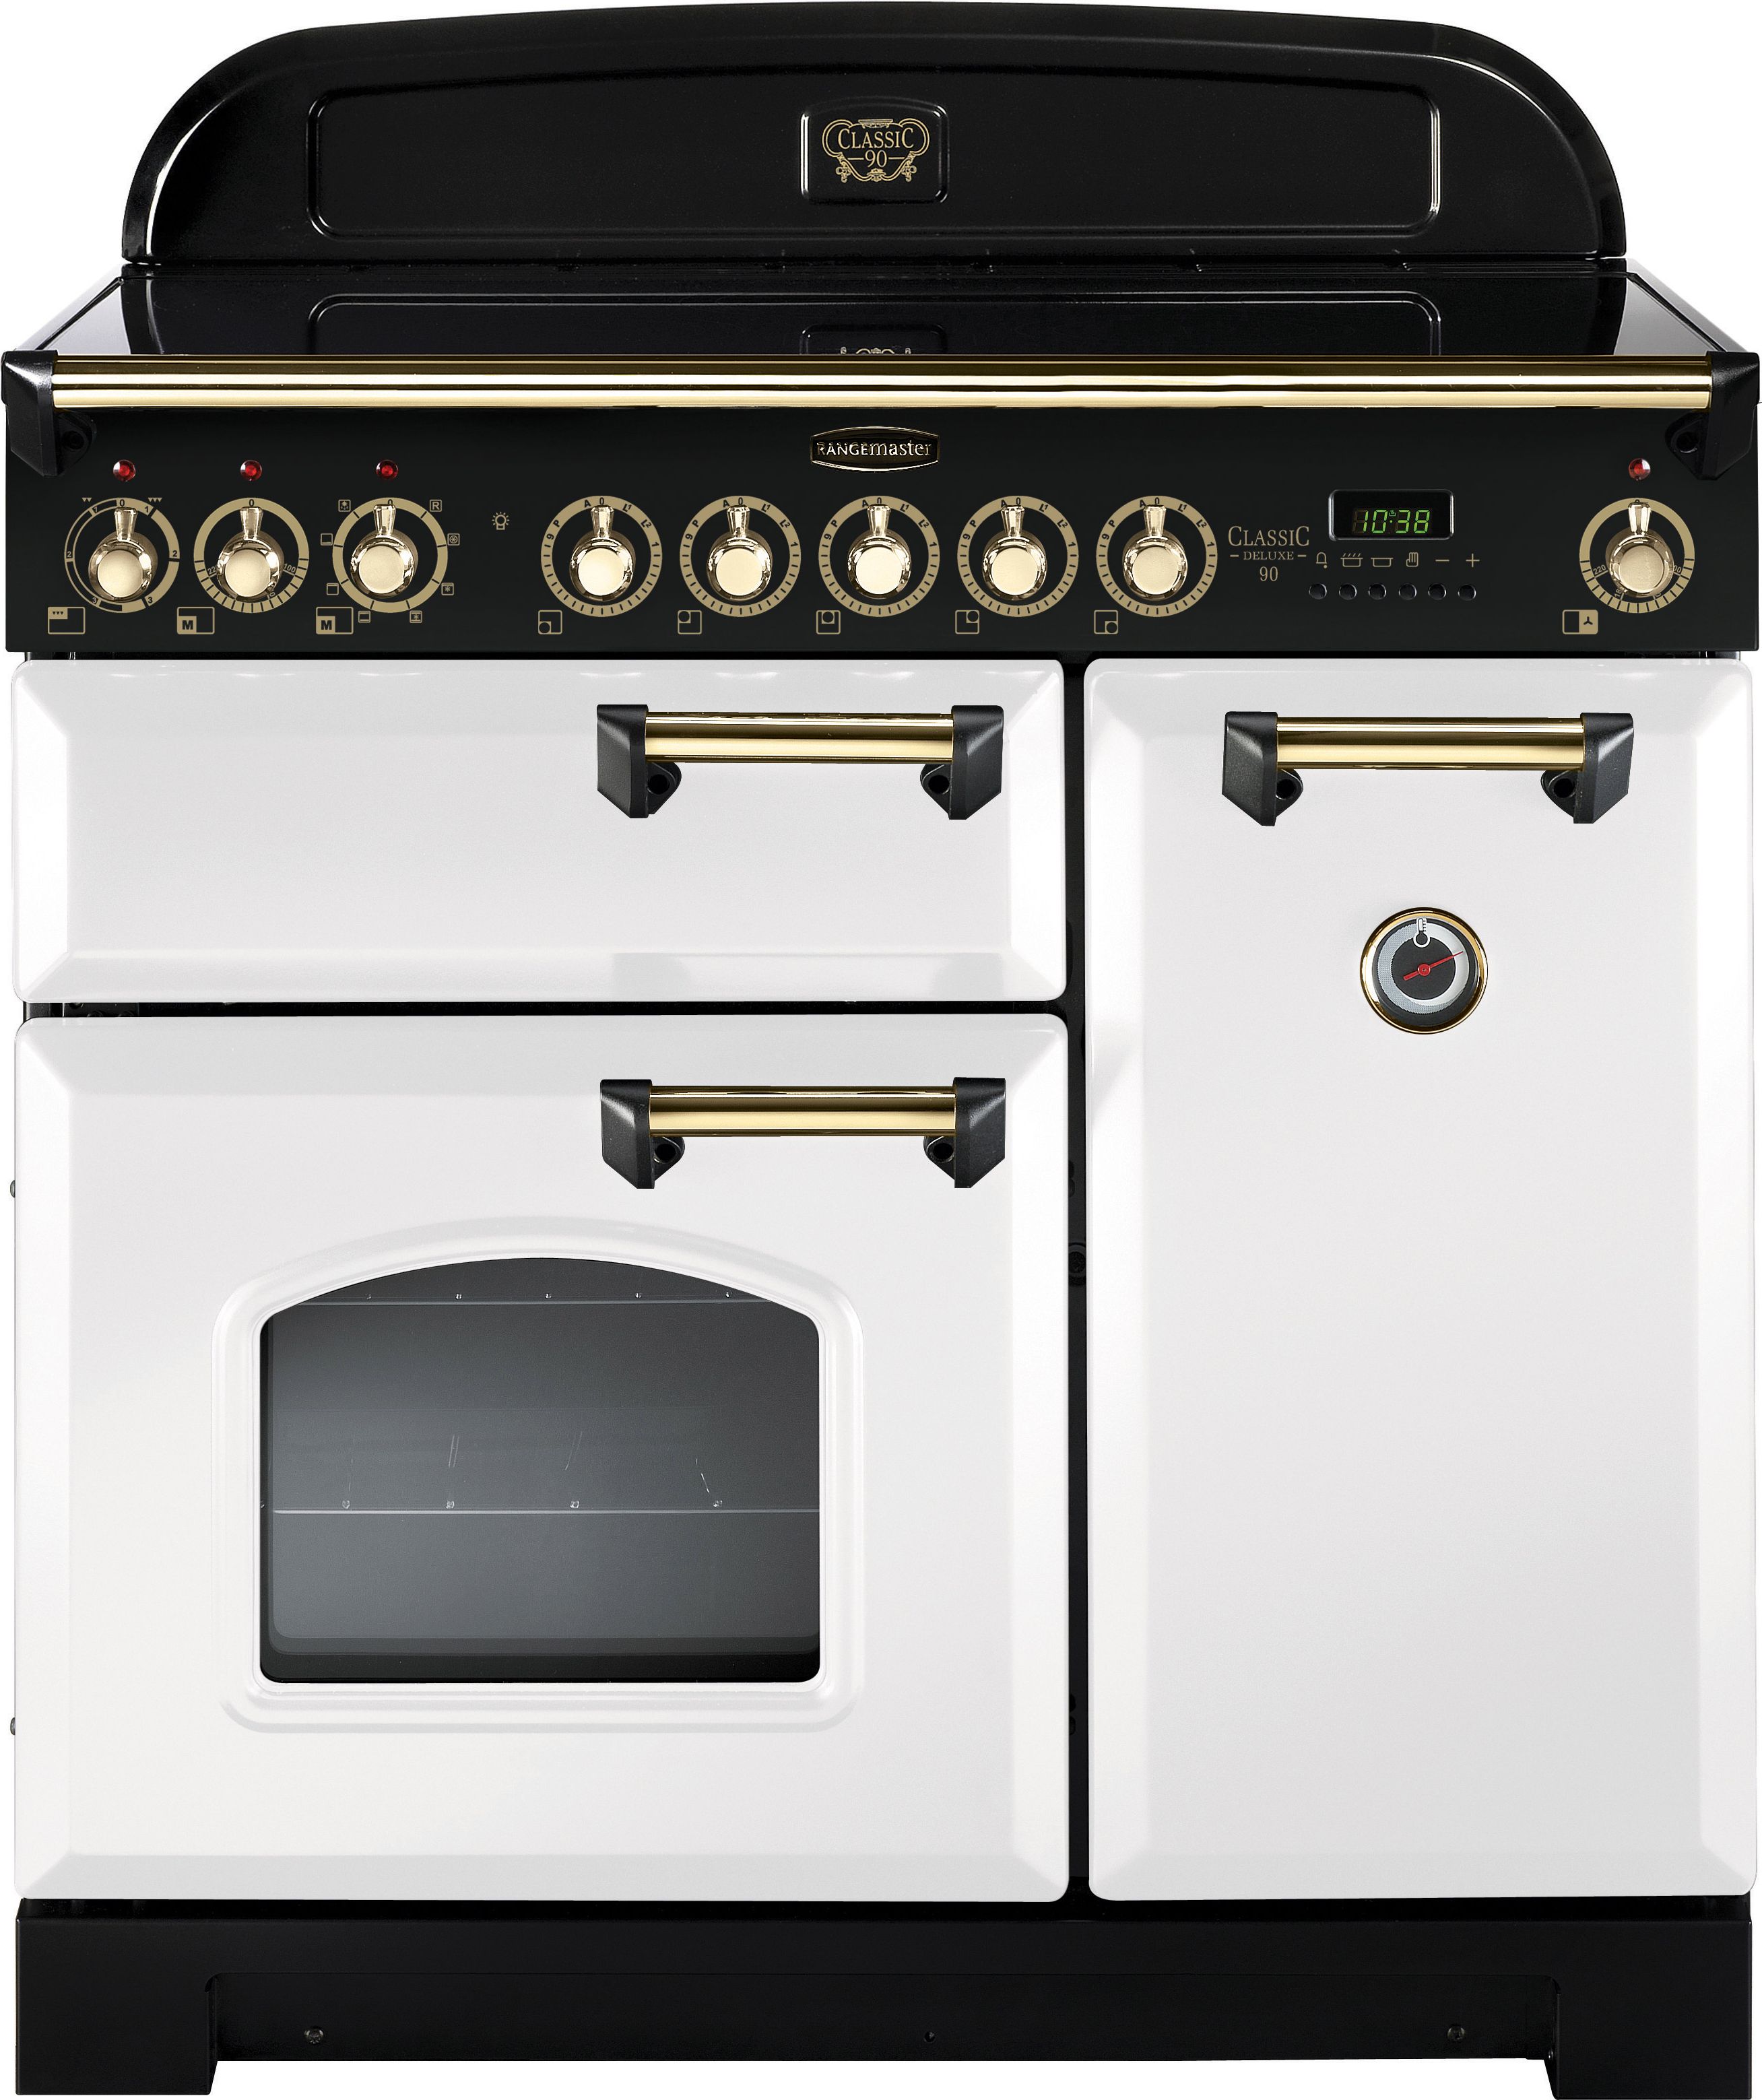 Rangemaster Classic Deluxe CDL90EIWH/B 90cm Electric Range Cooker with Induction Hob - White / Brass - A/A Rated, White